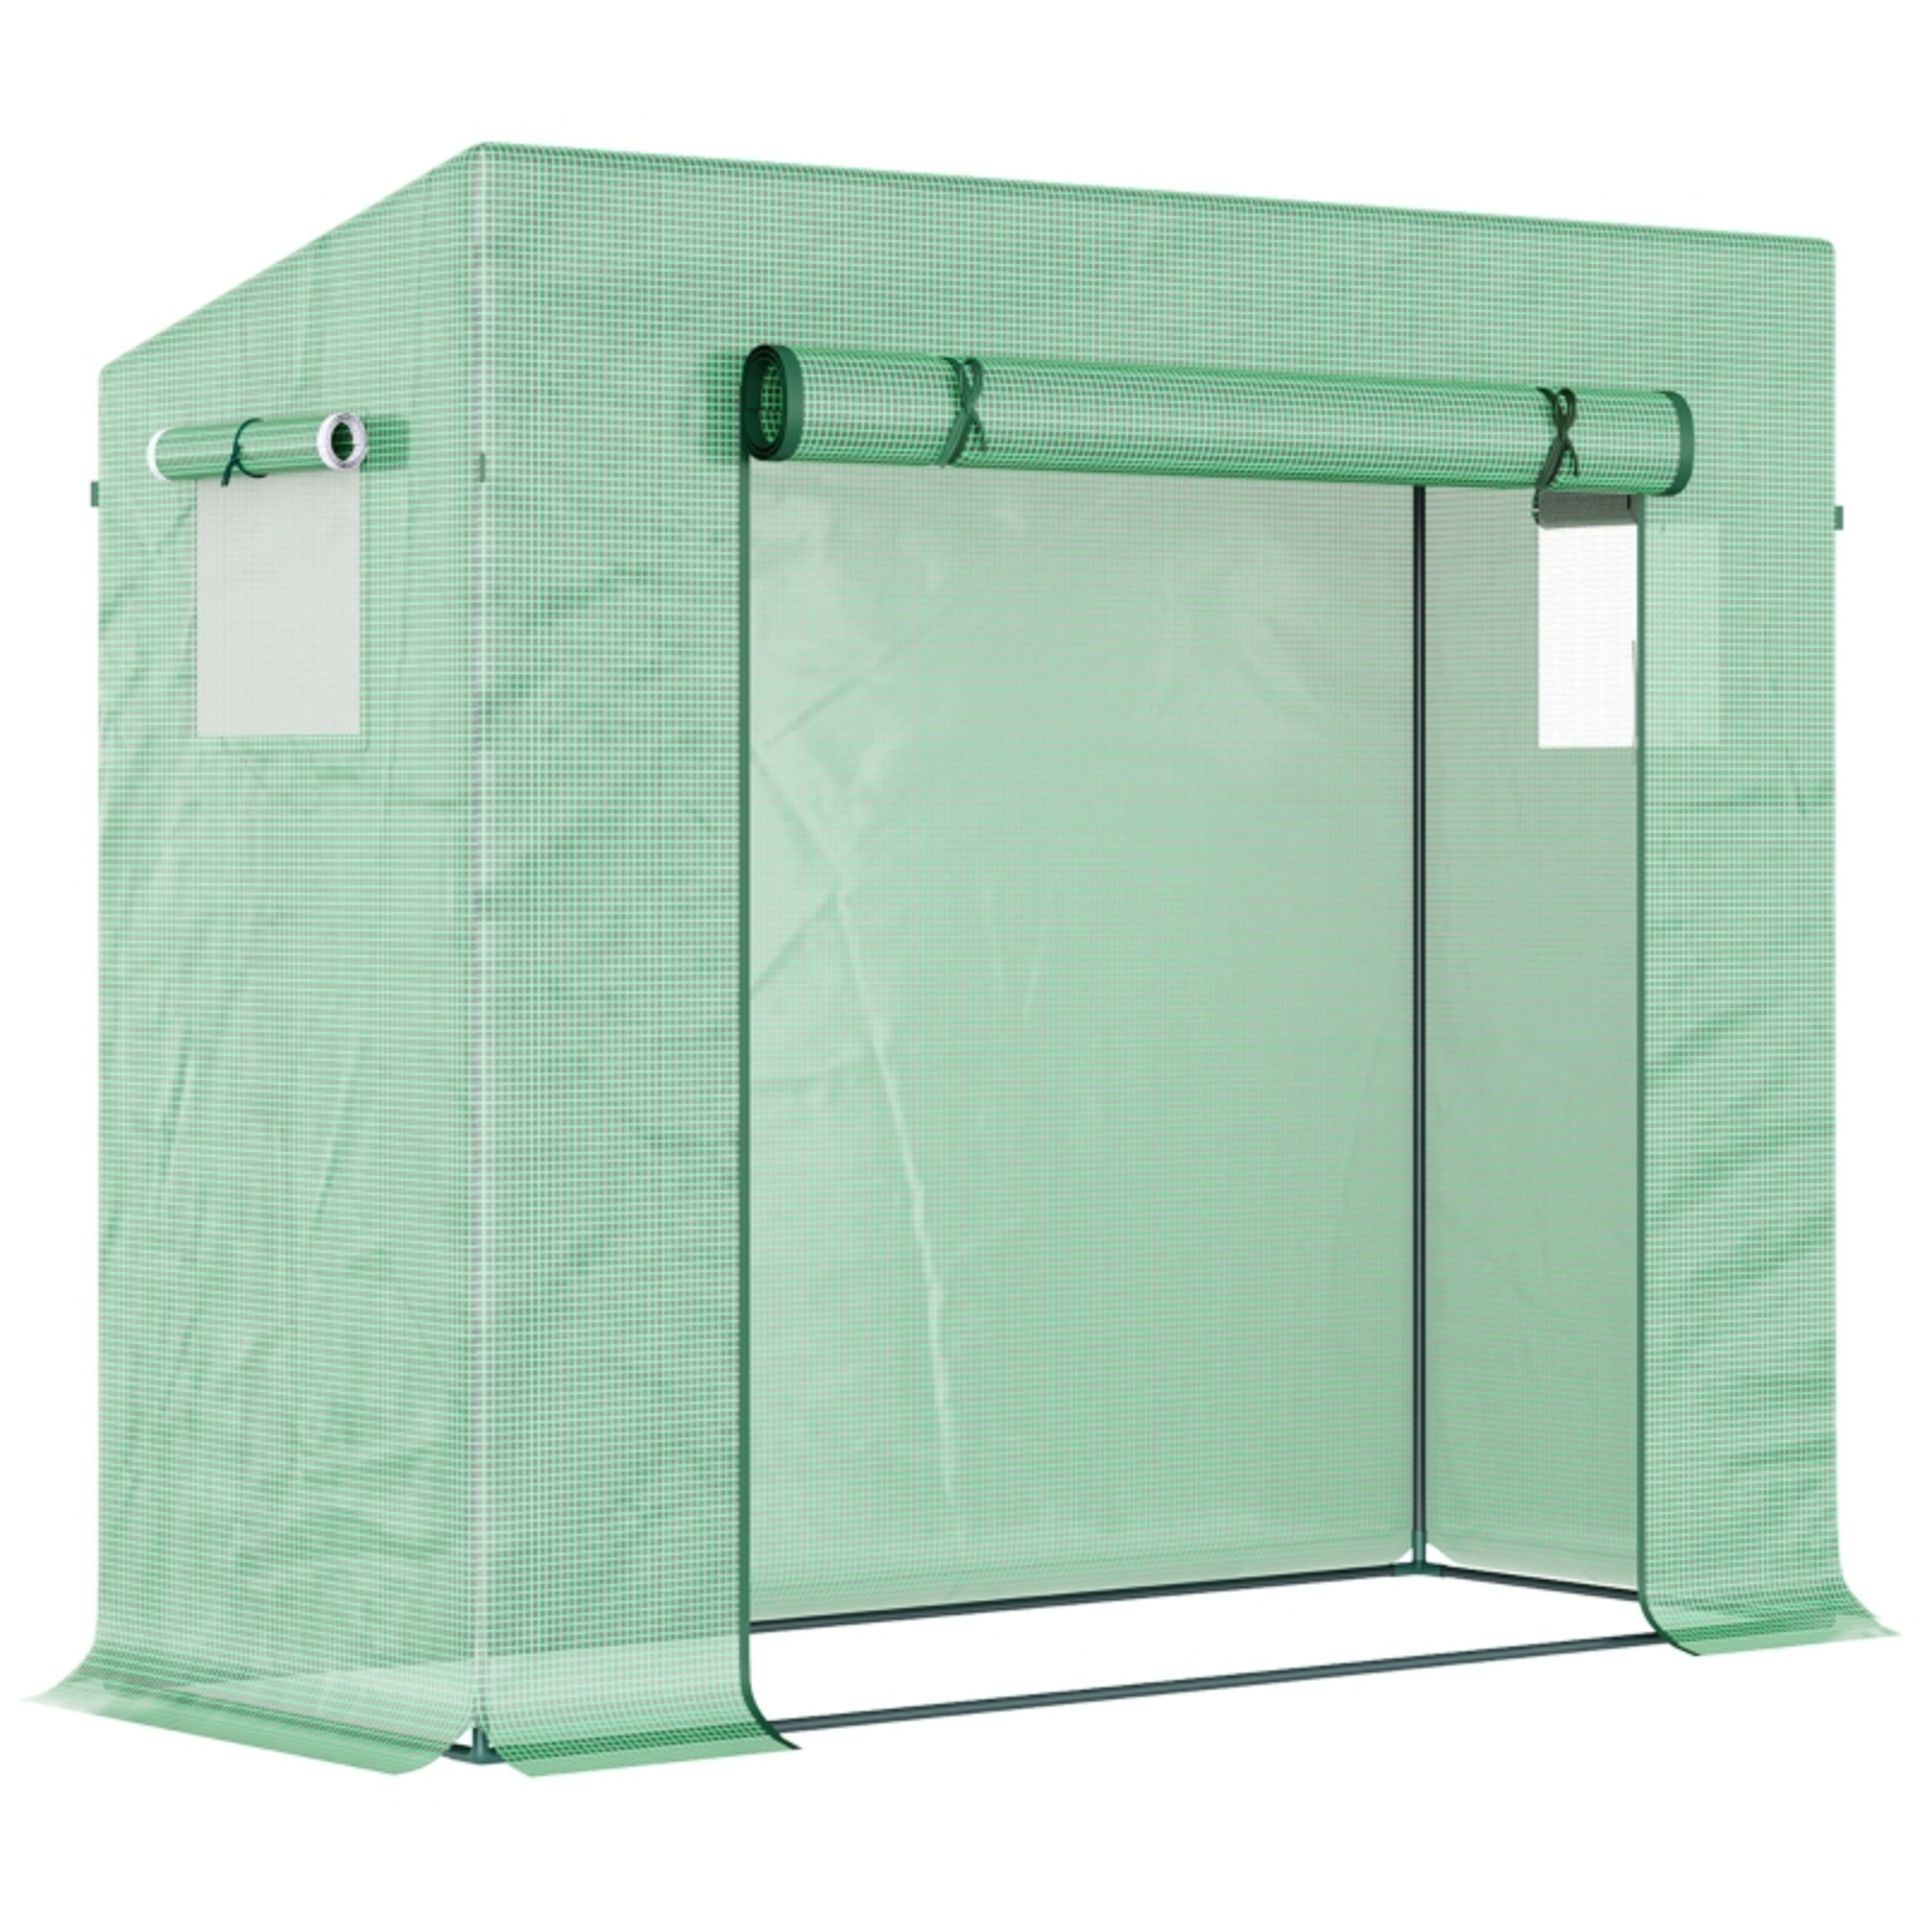 RPP £335.99 -Outsunny Outdoor Greenhouse Poly Tunnel Plants Reinforced Top Cover 1.98 X 0.77 X 1. - Image 2 of 5